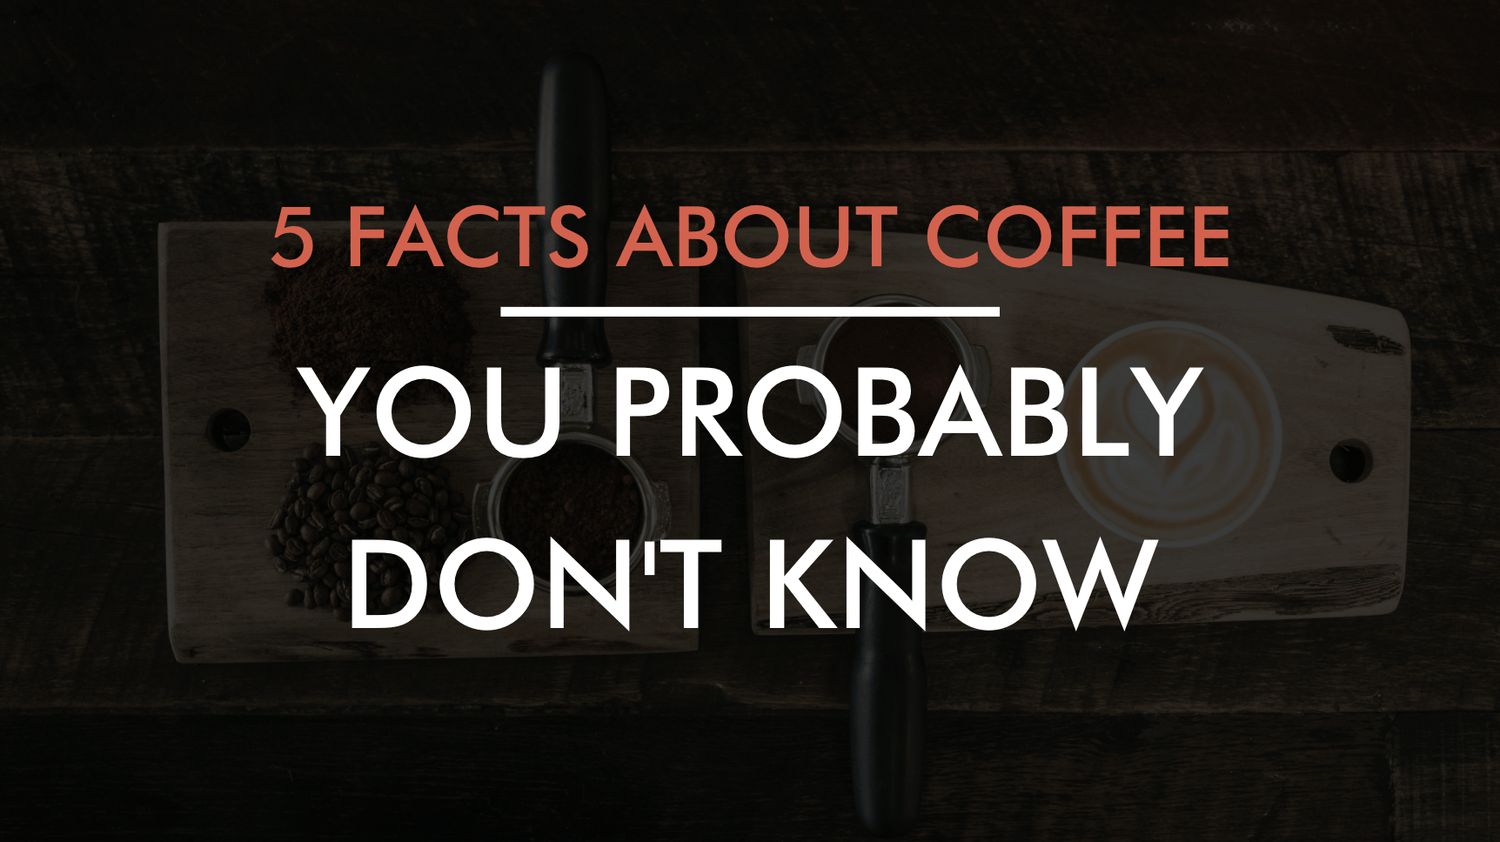 5 Facts About Coffee That You Probably Didn't Know